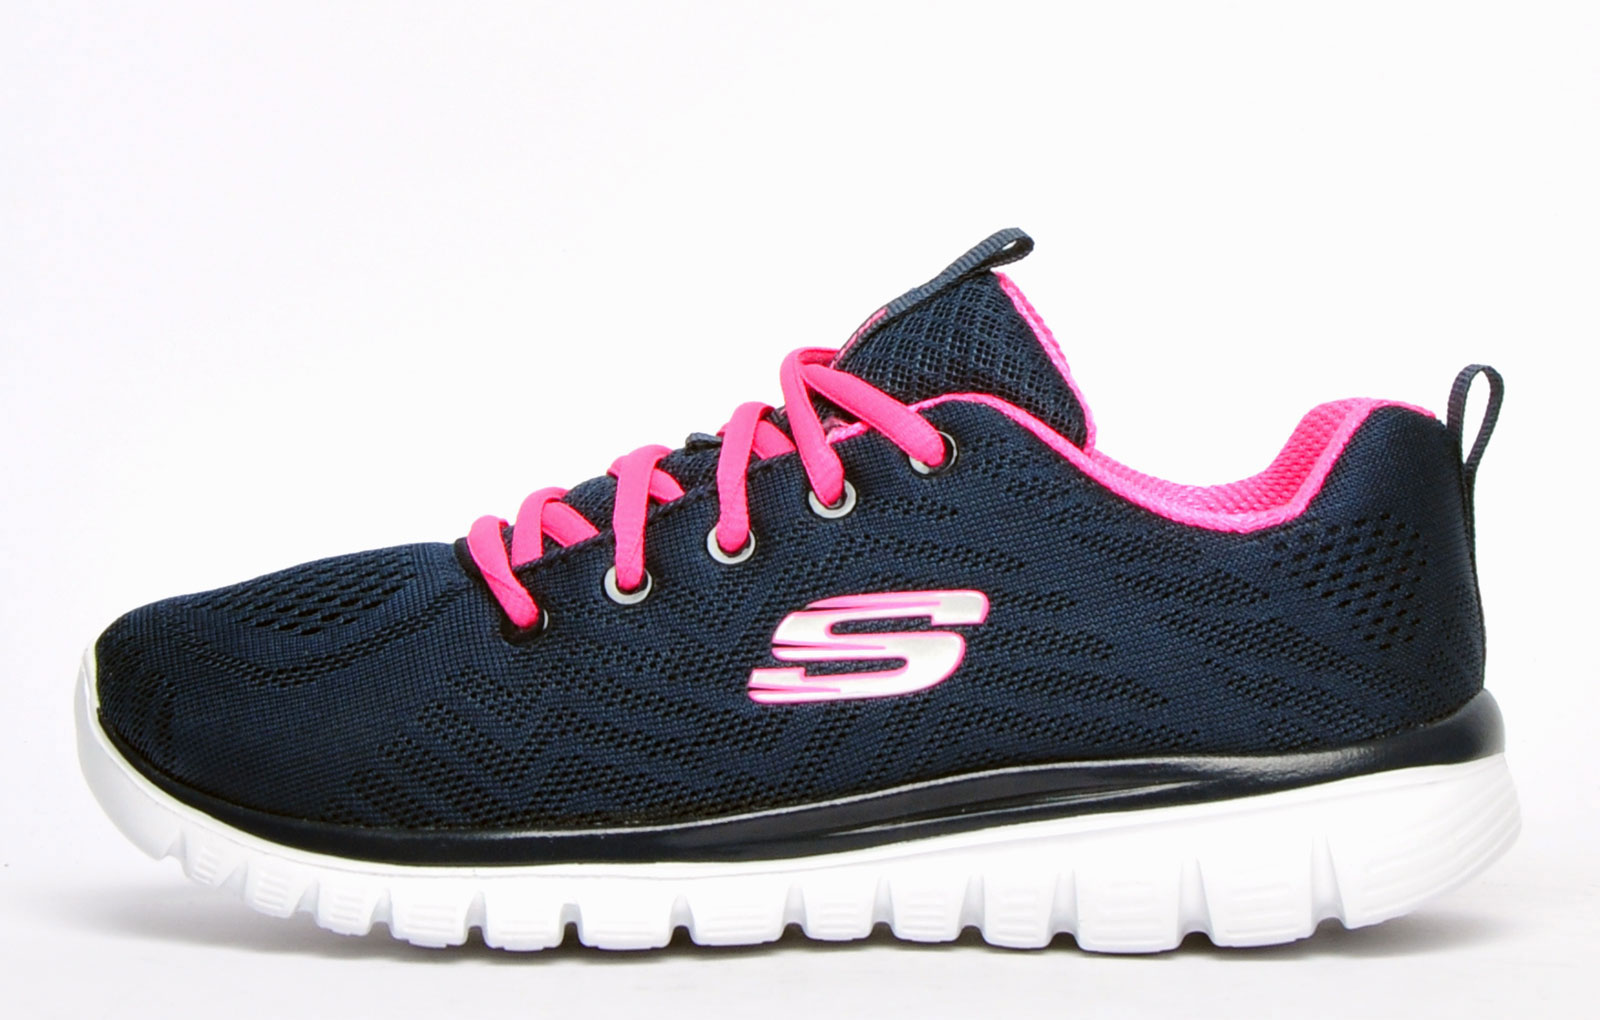 Cheap Skechers for Women UK Free | Express Trainers